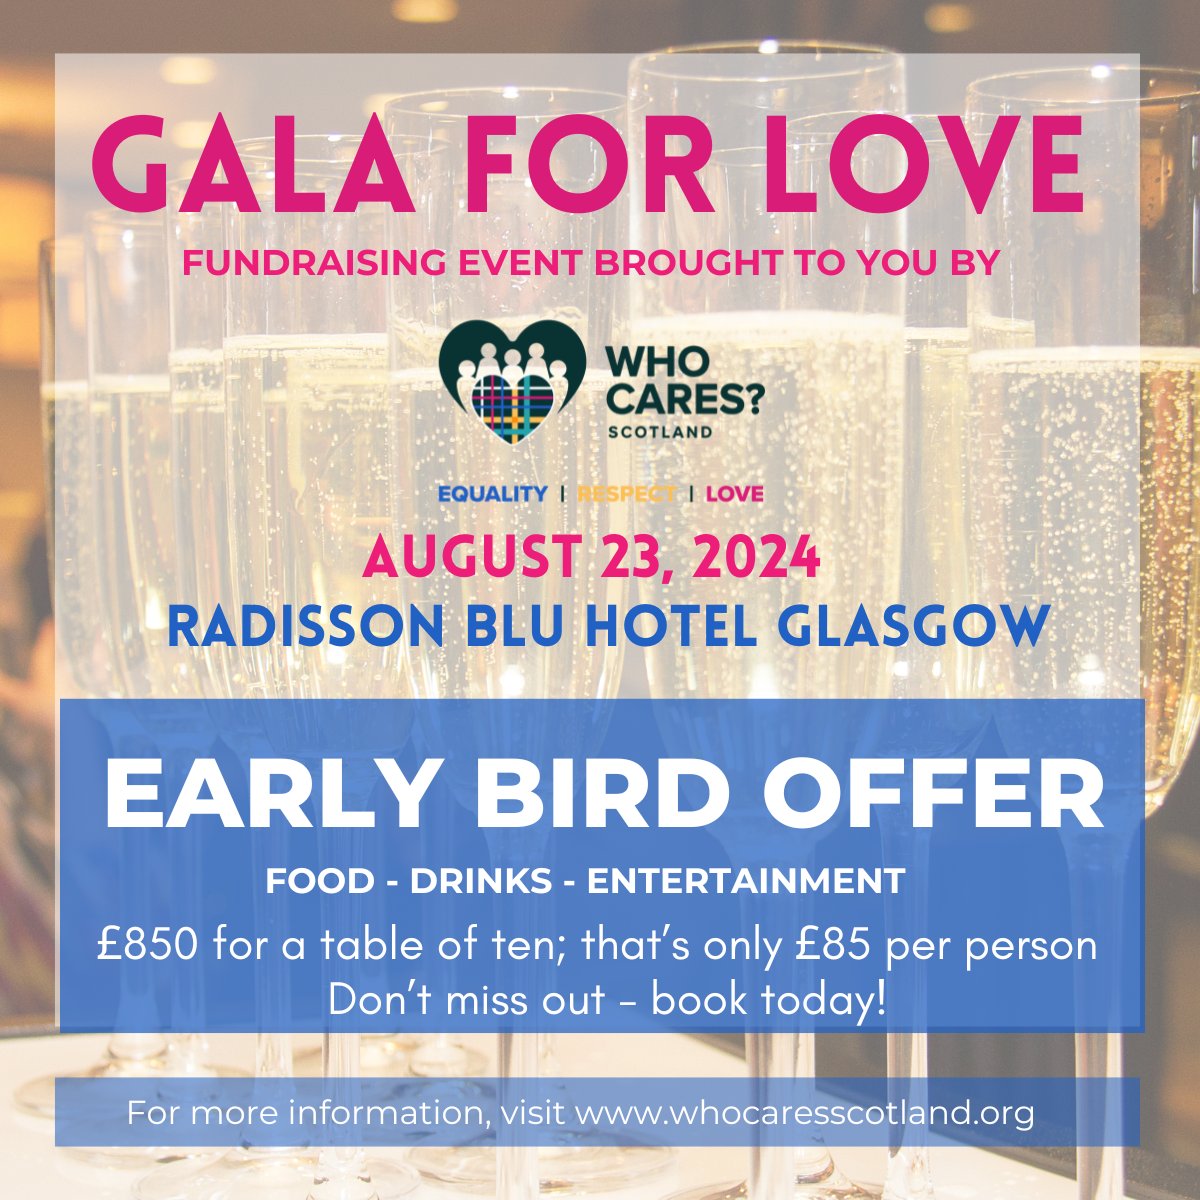 Don't miss out on our special Early Bird Offer for the 2024 Gala for Love! This is your chance to secure a table for ten at the discounted rate of £850. Book your tickets before it's too late: ow.ly/8R5v50RqPHZ #GalaForLove2024 #CareExperience #GalaDinnerGlasgow